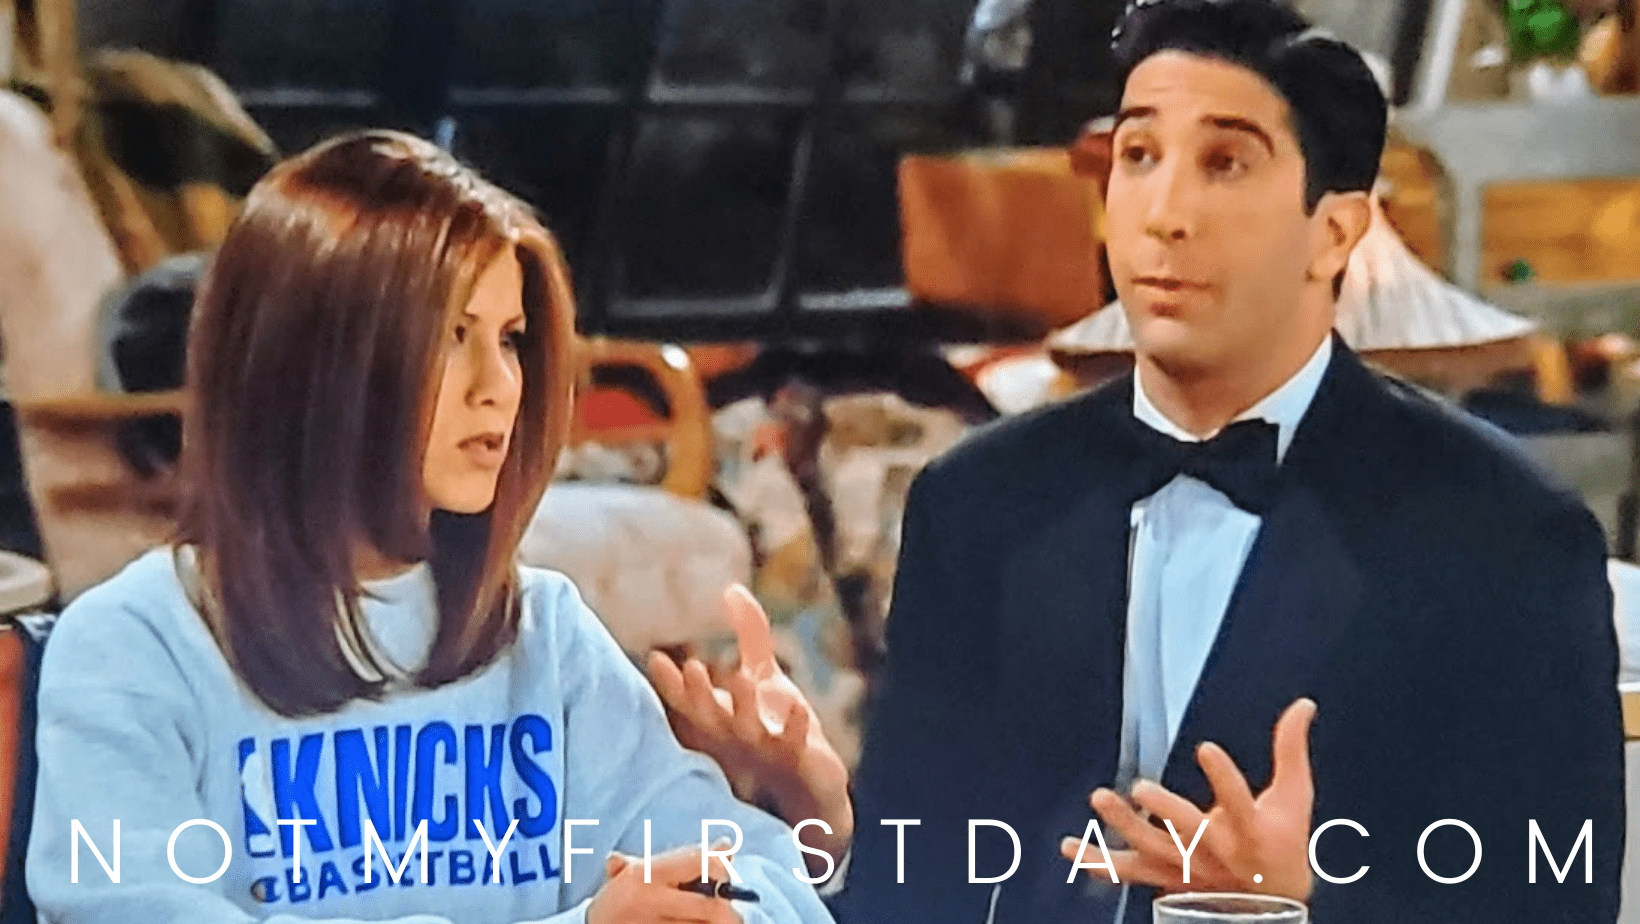 When Ross Drinks the Fat | The One Where No One is Ready on Friends